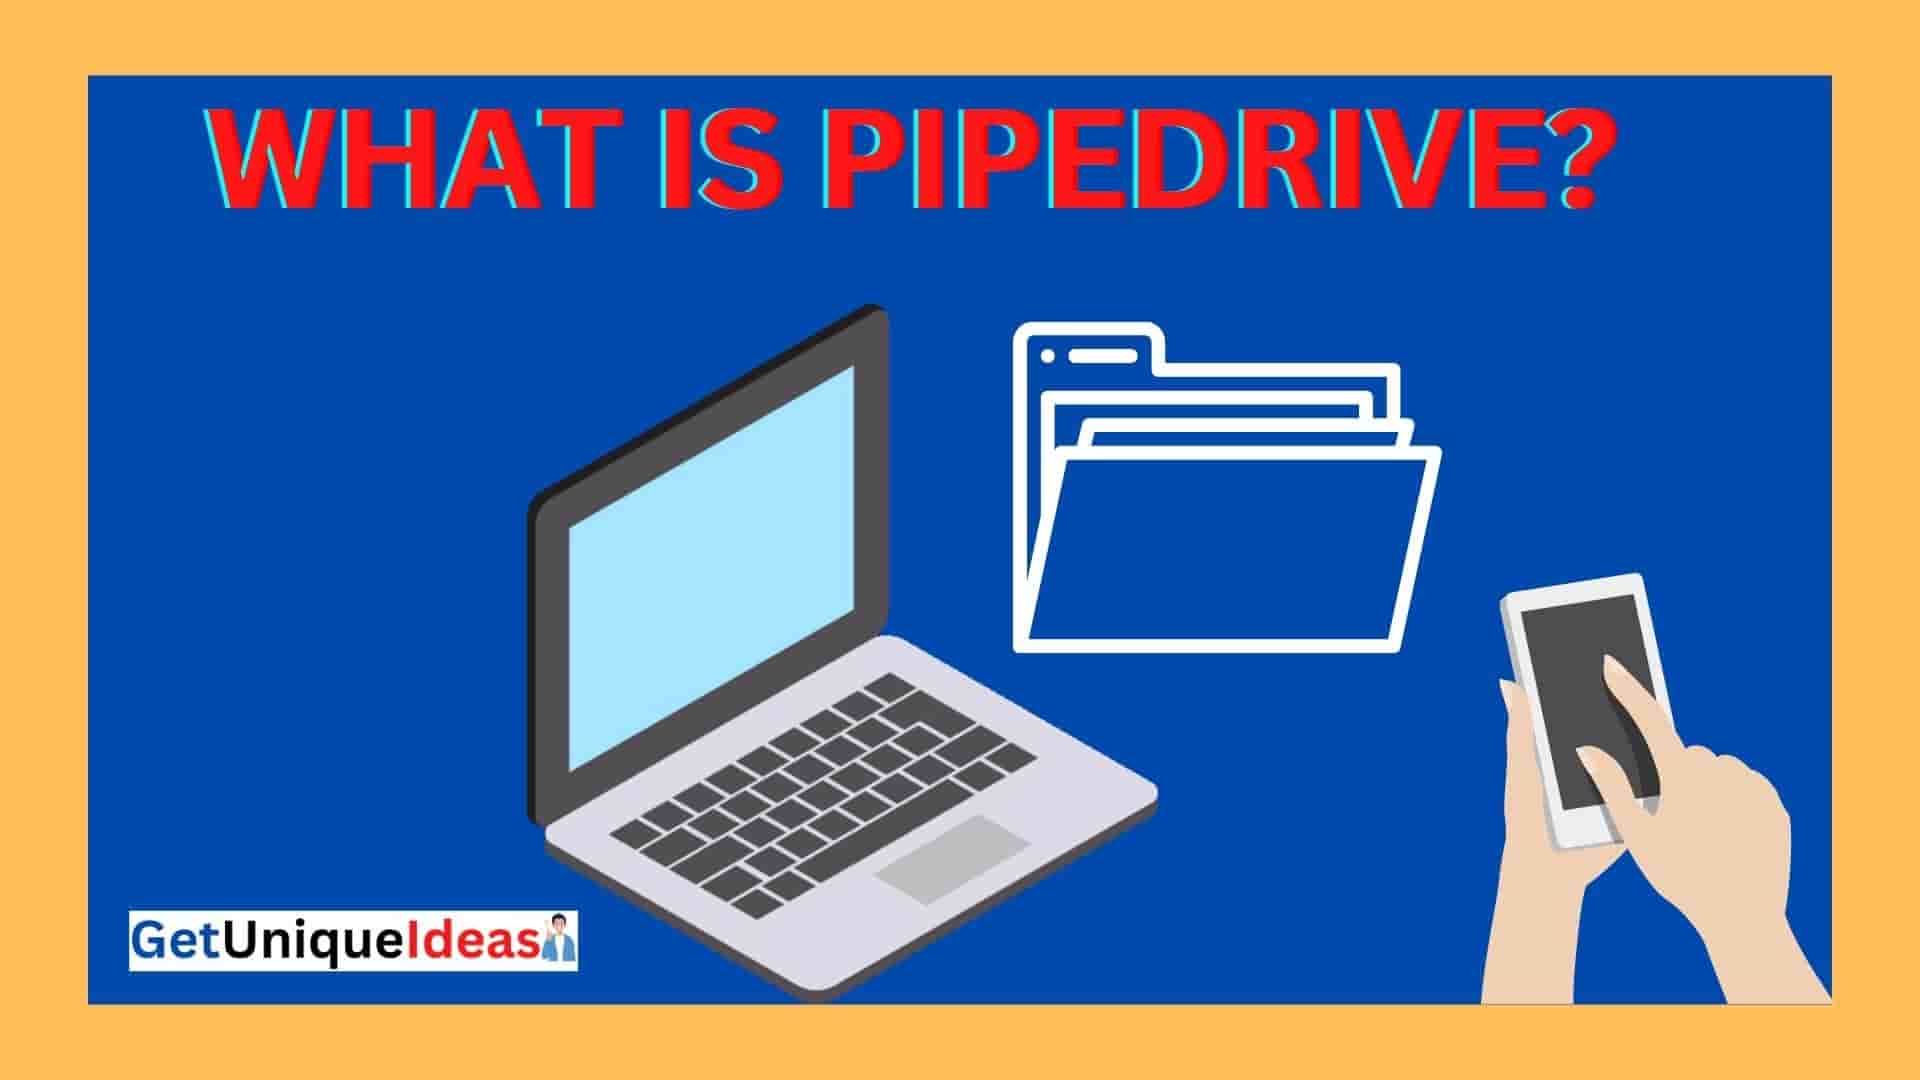 WHAT IS PIPEDRIVE?